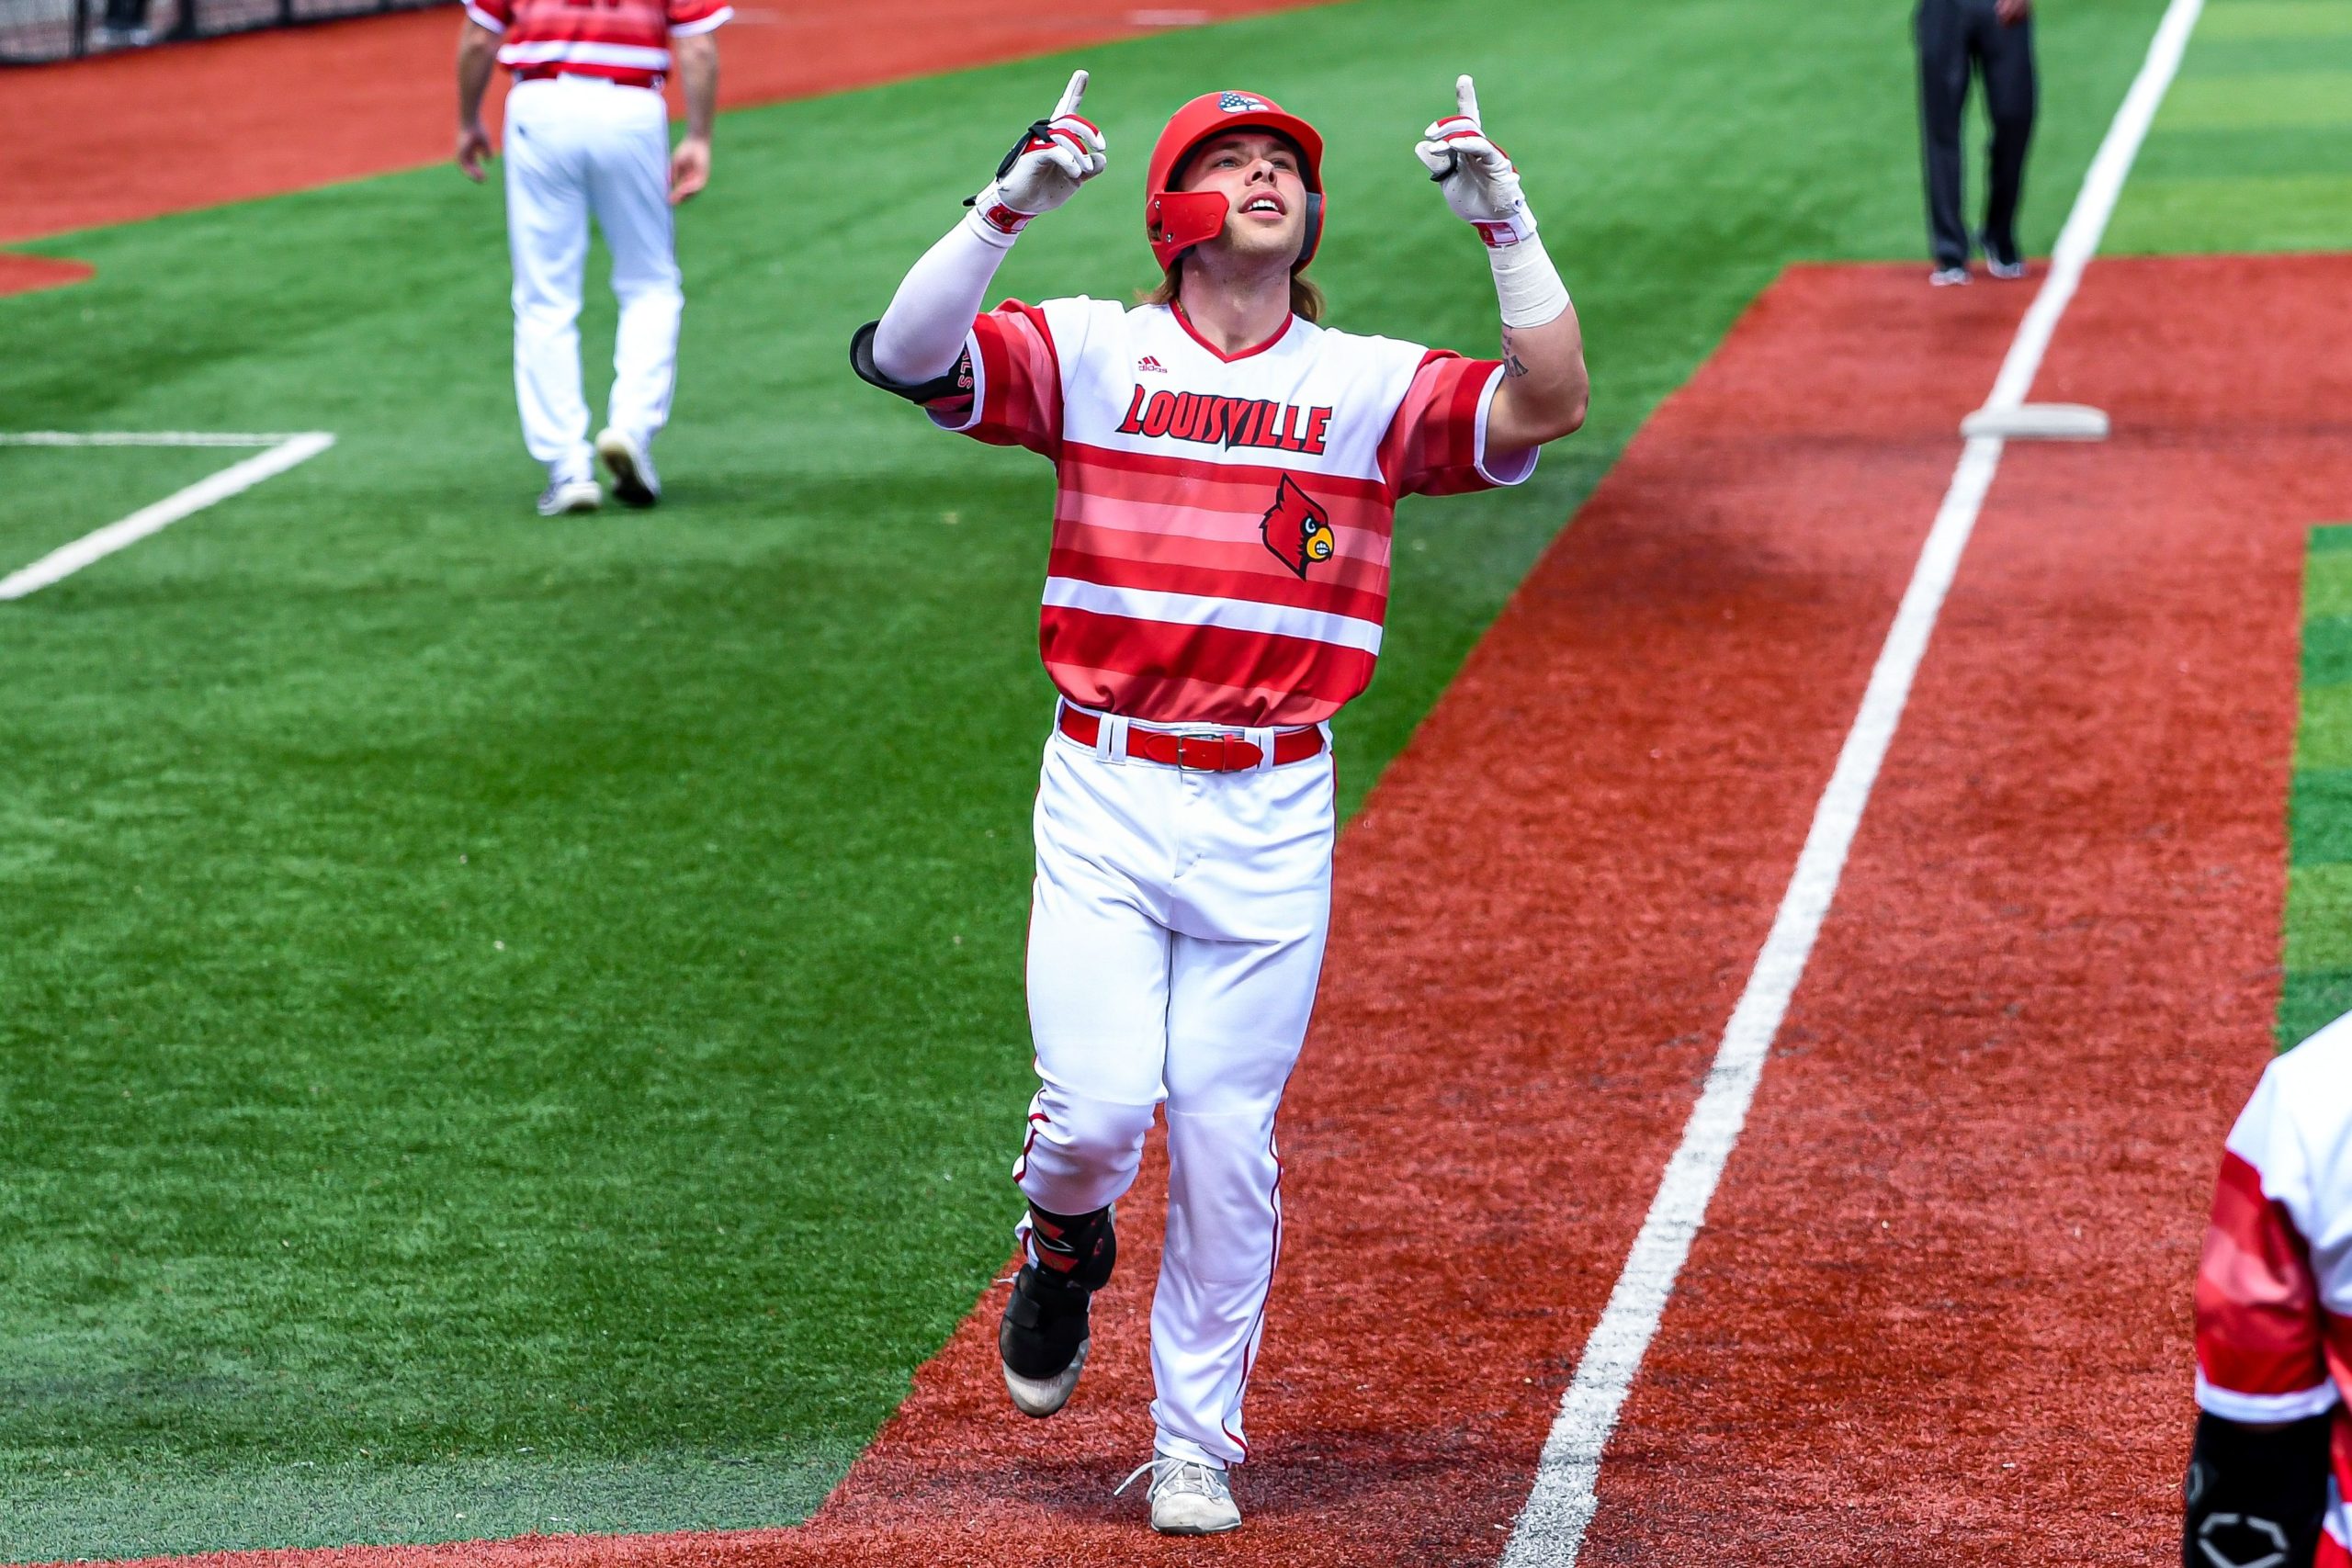 Check out the University of Louisville's new baseball uniforms